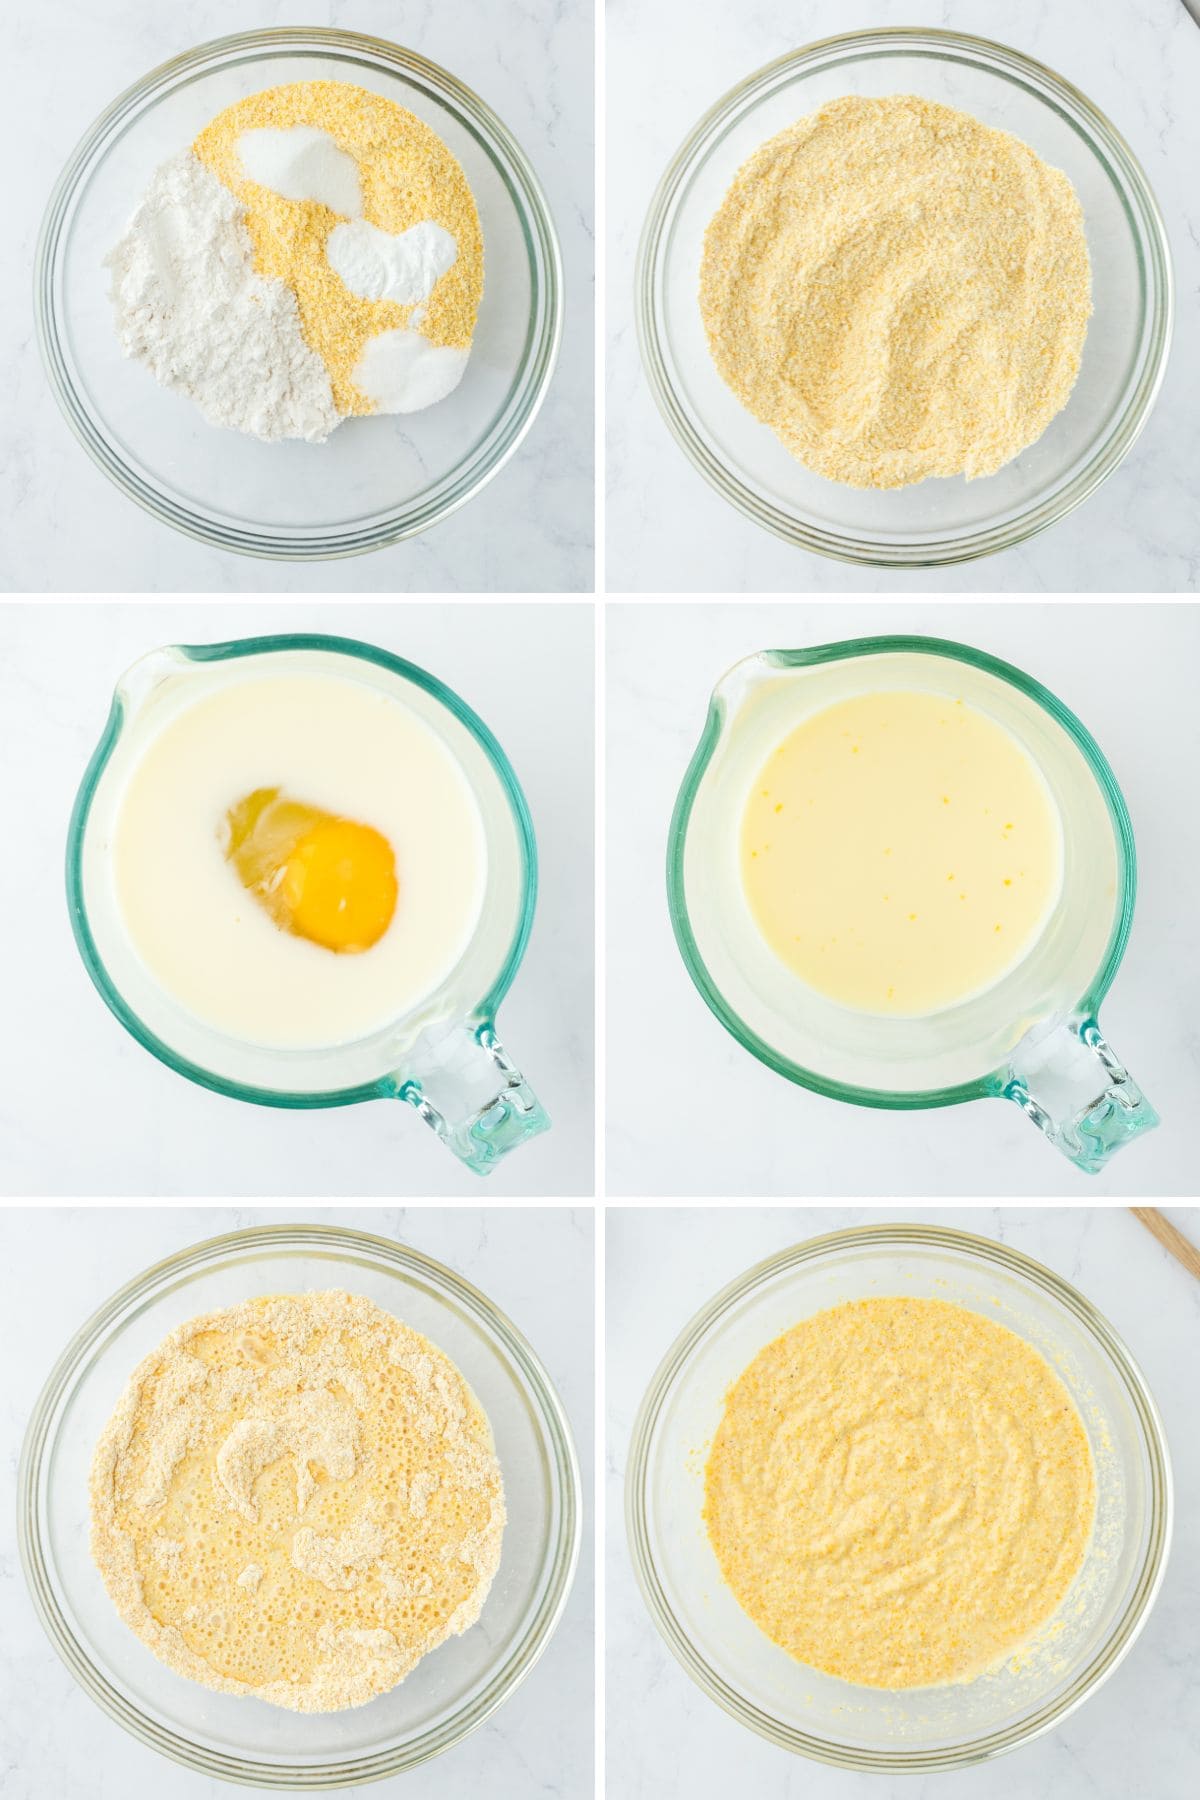 Collage of images showing the steps to make the batter for the fried cornbread